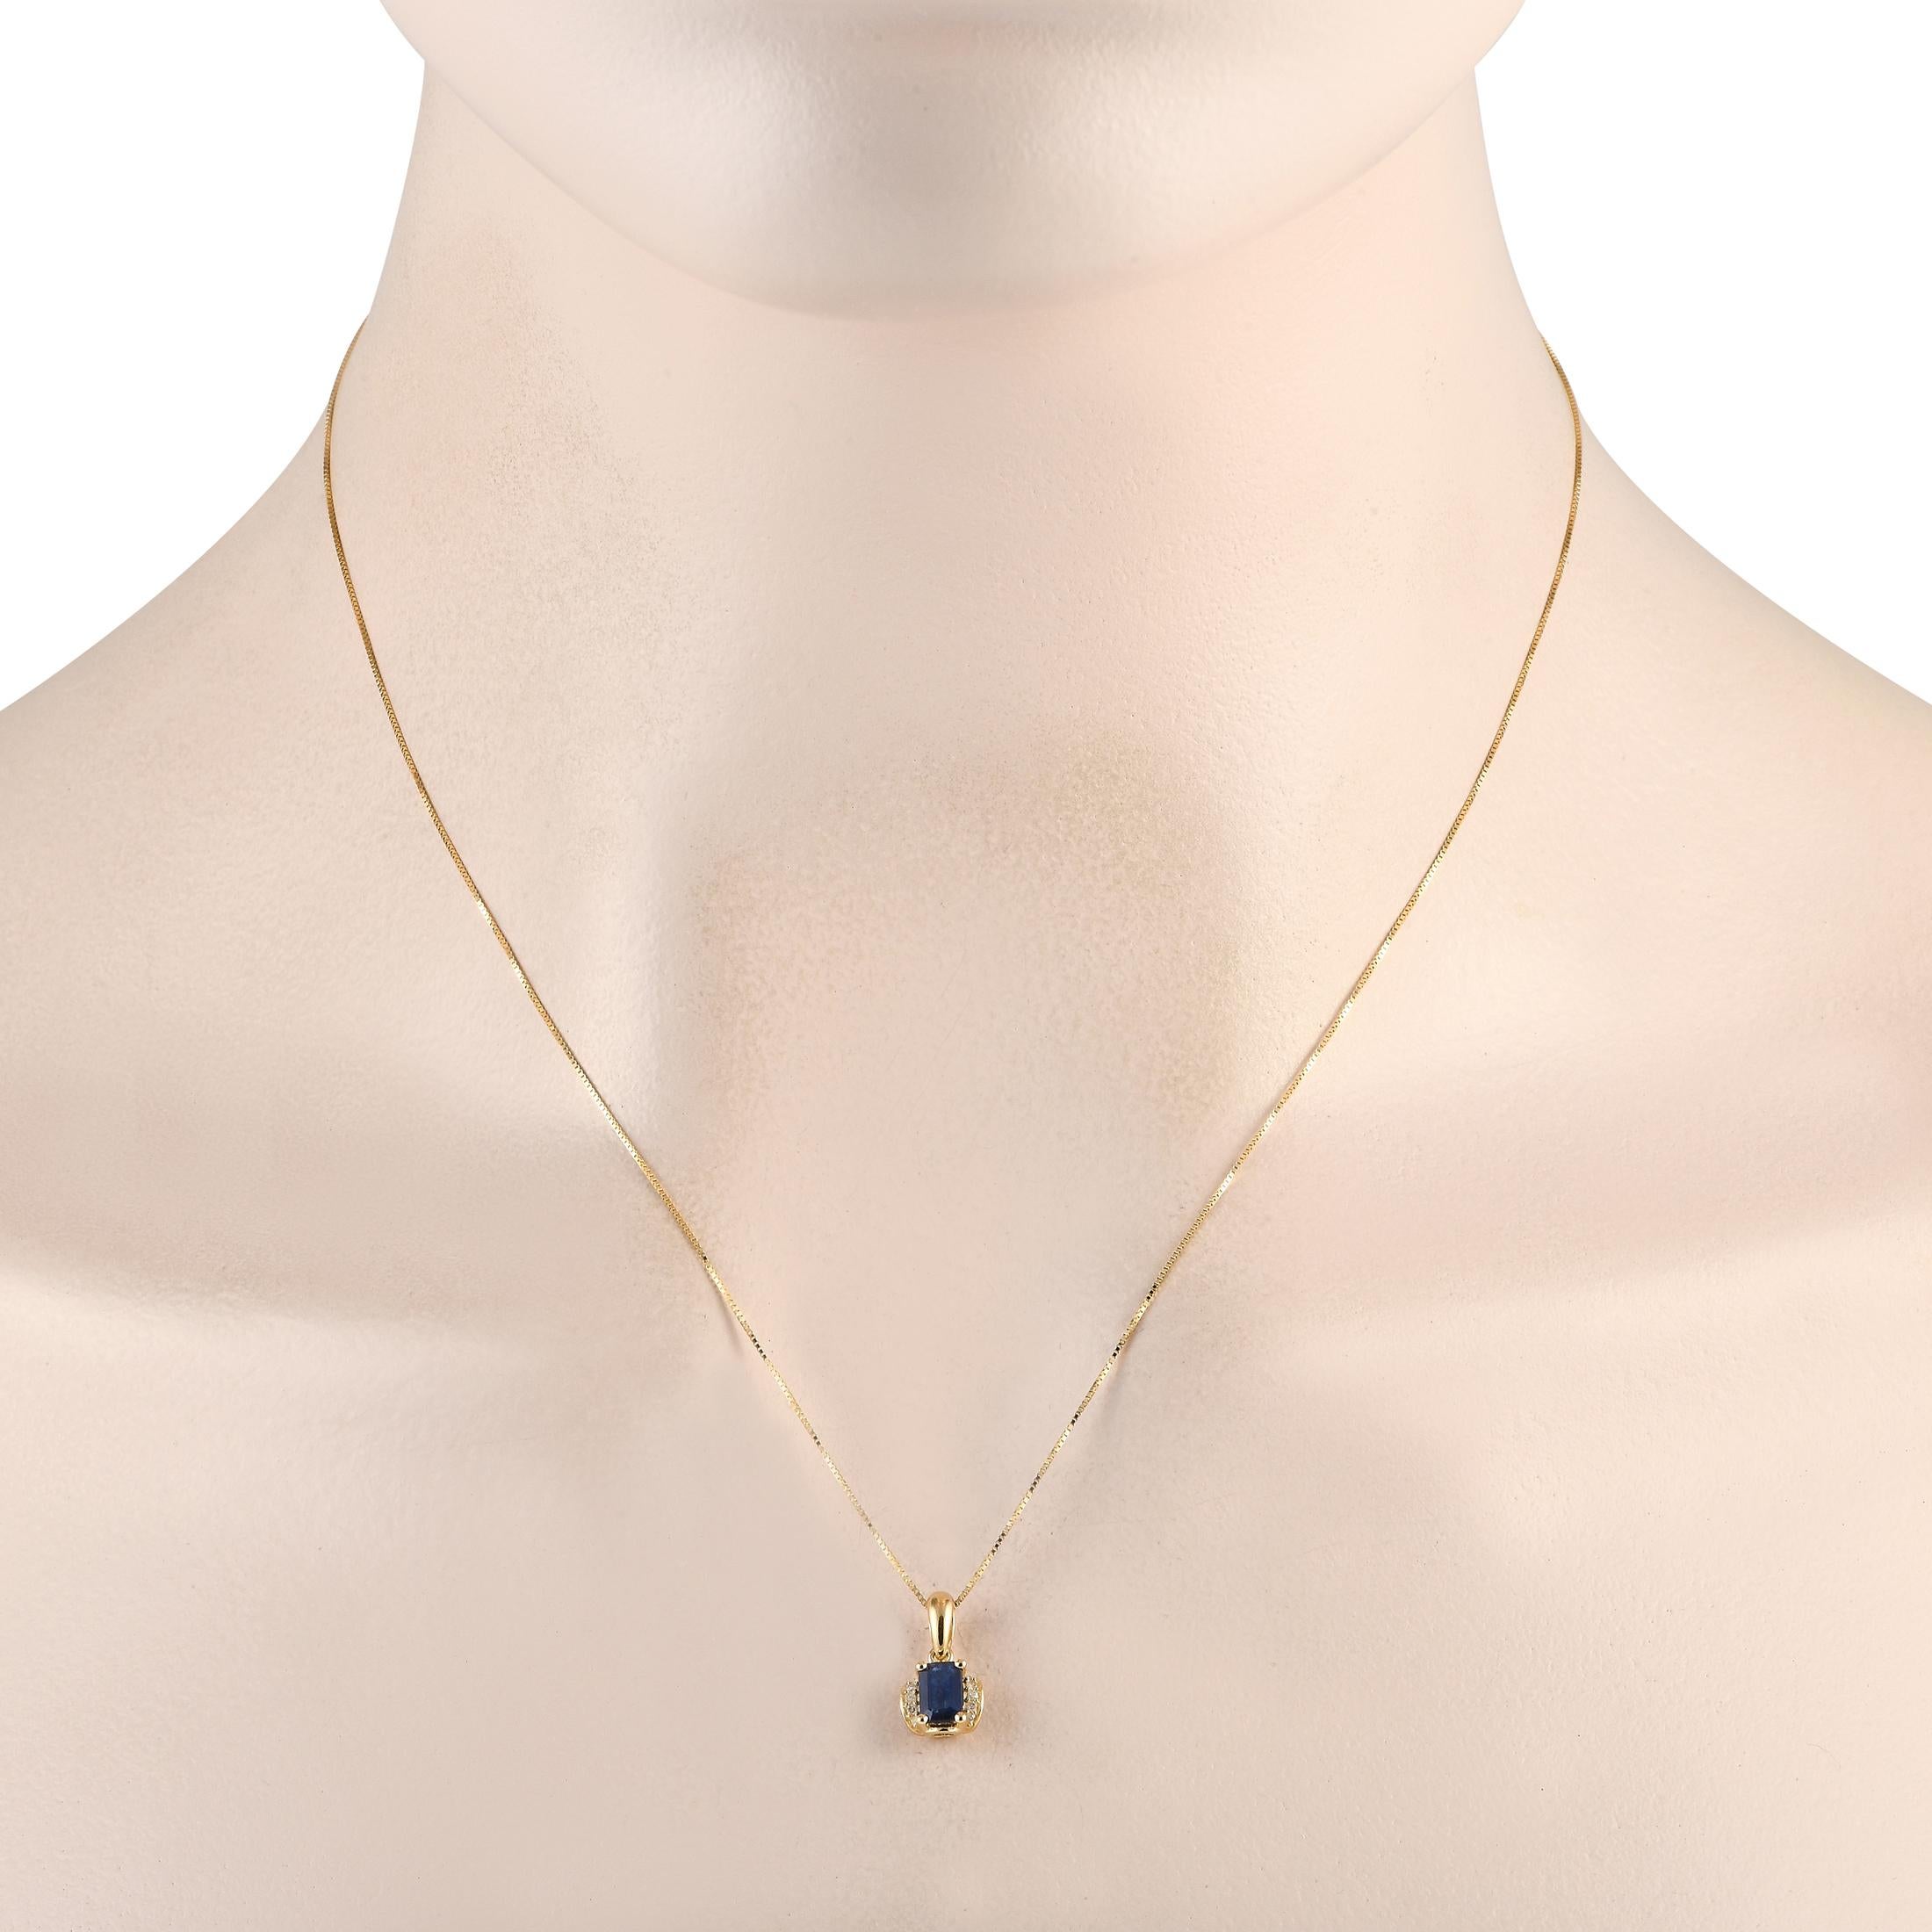 Add a touch of luxury to any ensemble with this simple, elegant necklace. Suspended from a sleek 18 box chain, youll find a 14K Yellow Gold pendant measuring 0.50 long by 0.25 wide. A single Sapphire gemstone makes a statement at the center, while